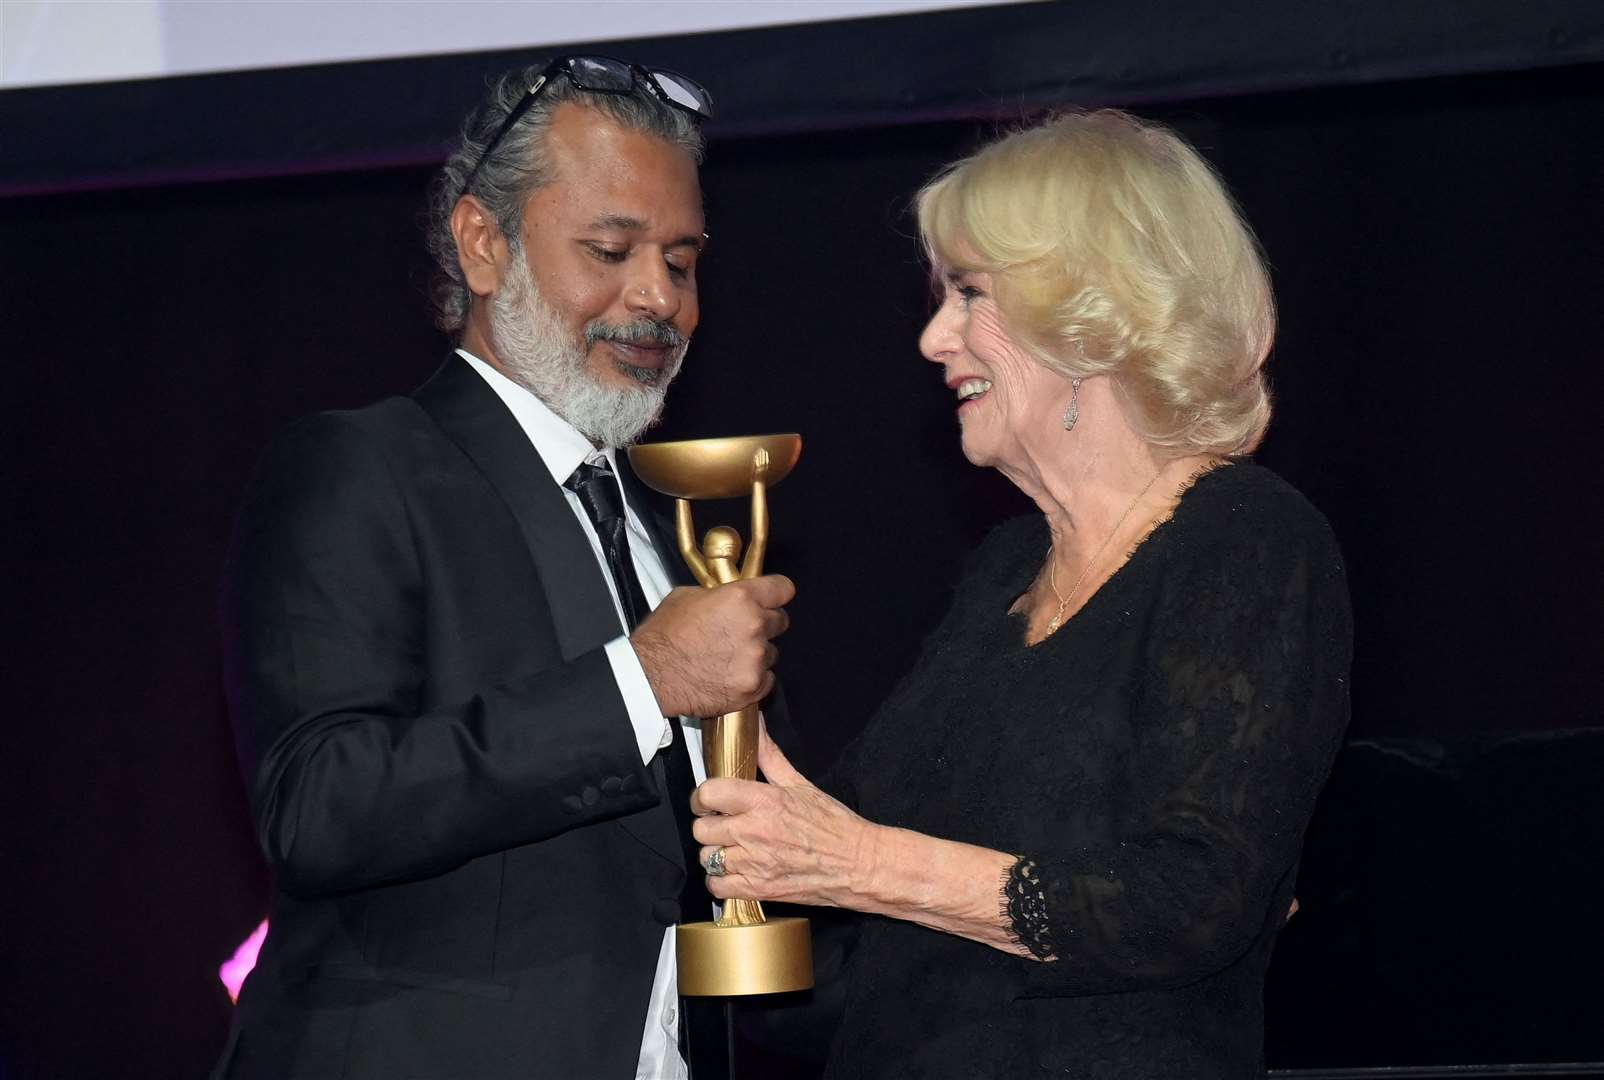 The Queen Consort presents the prize to Shehan Karunatilaka (Toby Melville/PA)